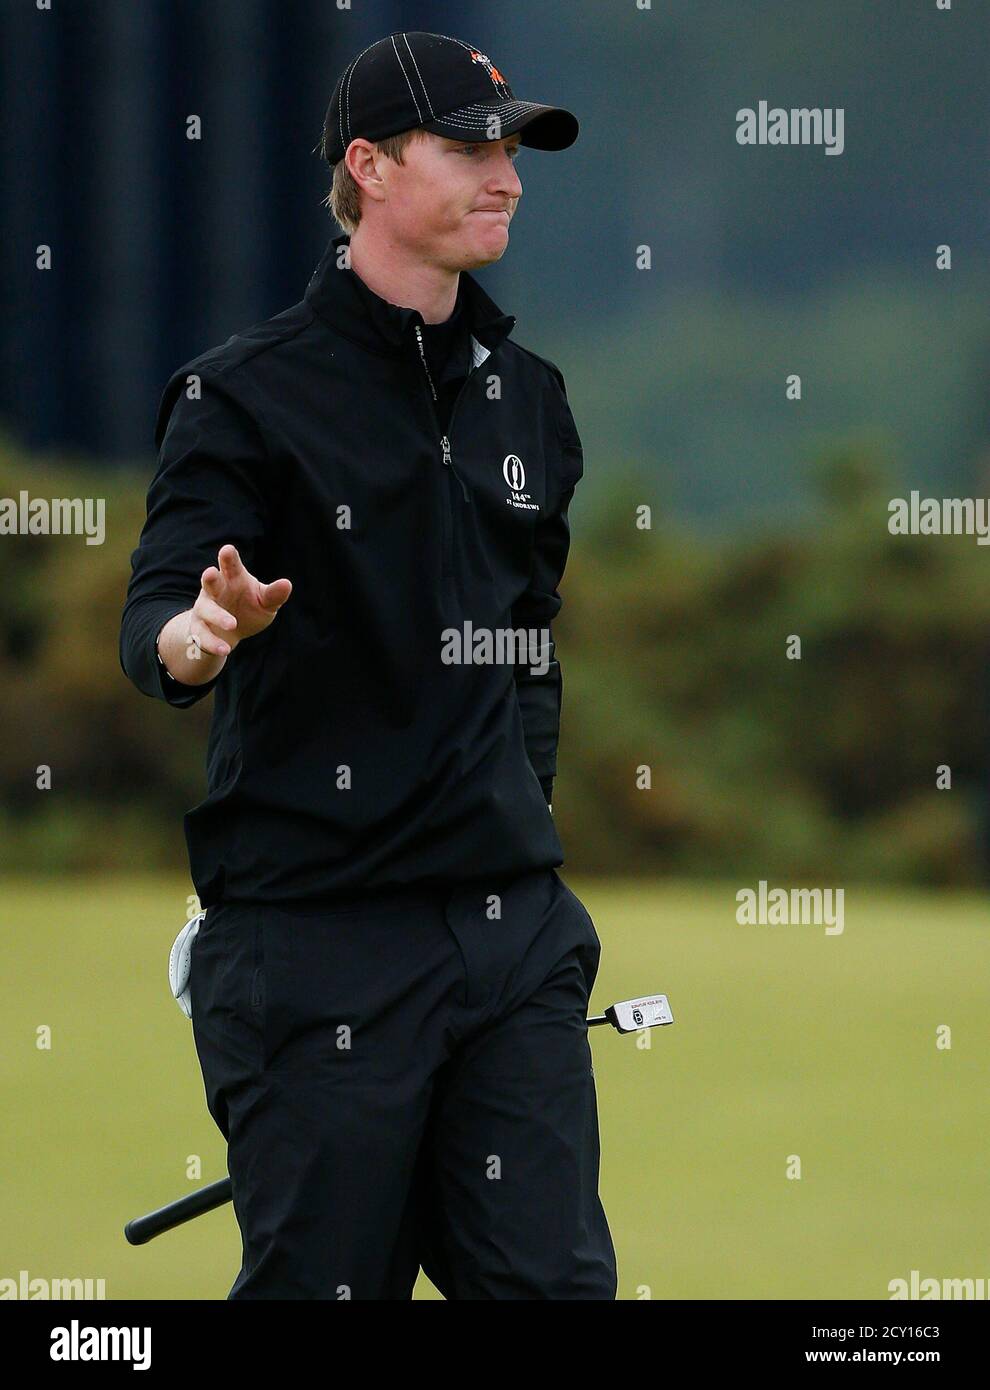 Jordan Niebrugge of the U.S. acknowledges the crowd after his birdie putt on the fifth hole during the final round of the British Open golf championship on the Old Course in St. Andrews, Scotland, July 20, 2015.     REUTERS/Russell Cheyne Stock Photo